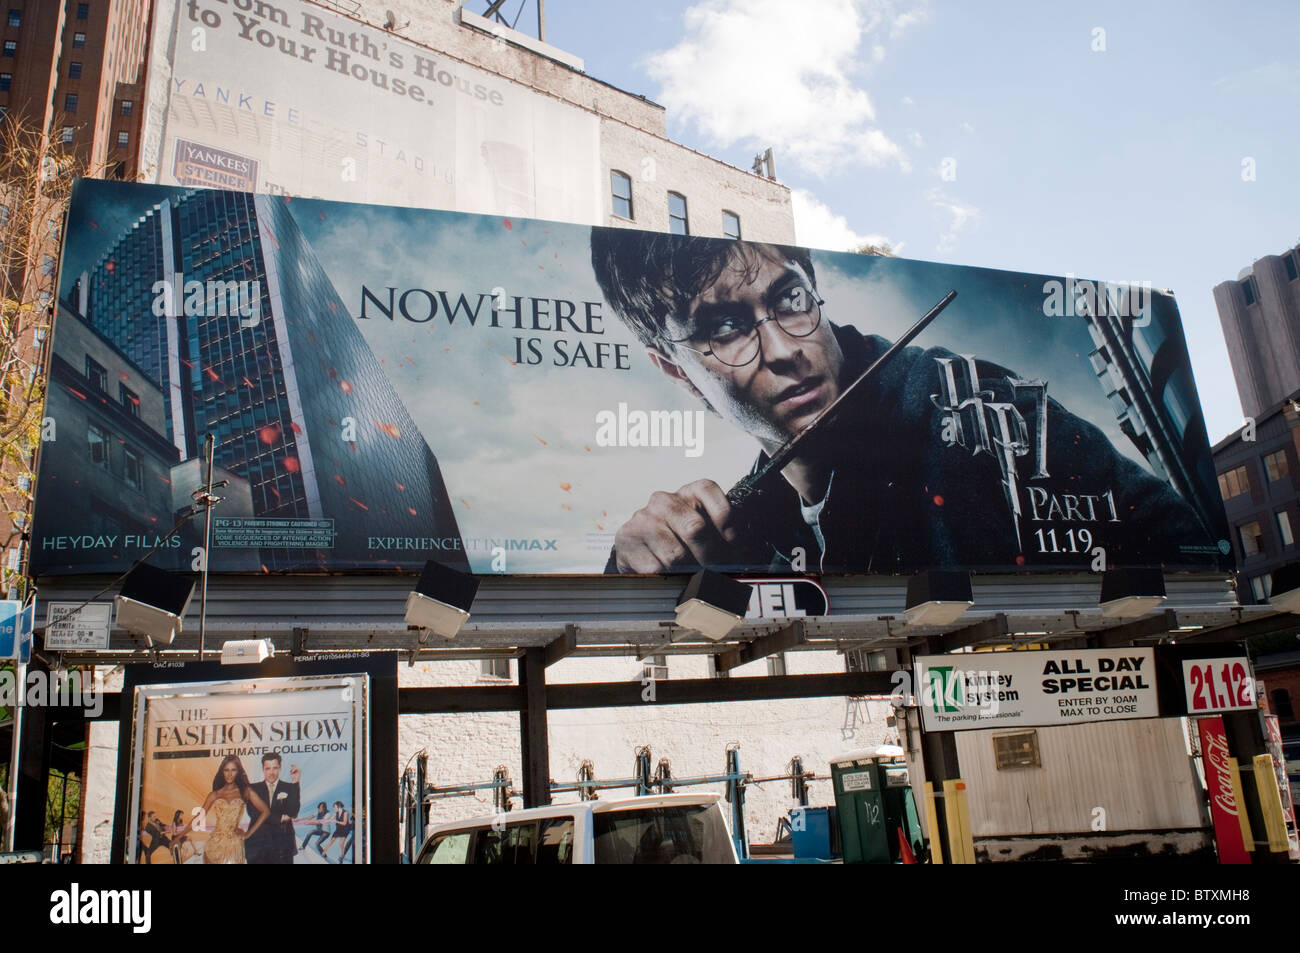 A billboard advertising the new Harry Potter film, 'Harry Potter and the Deathly Hallows', seen in New York Stock Photo